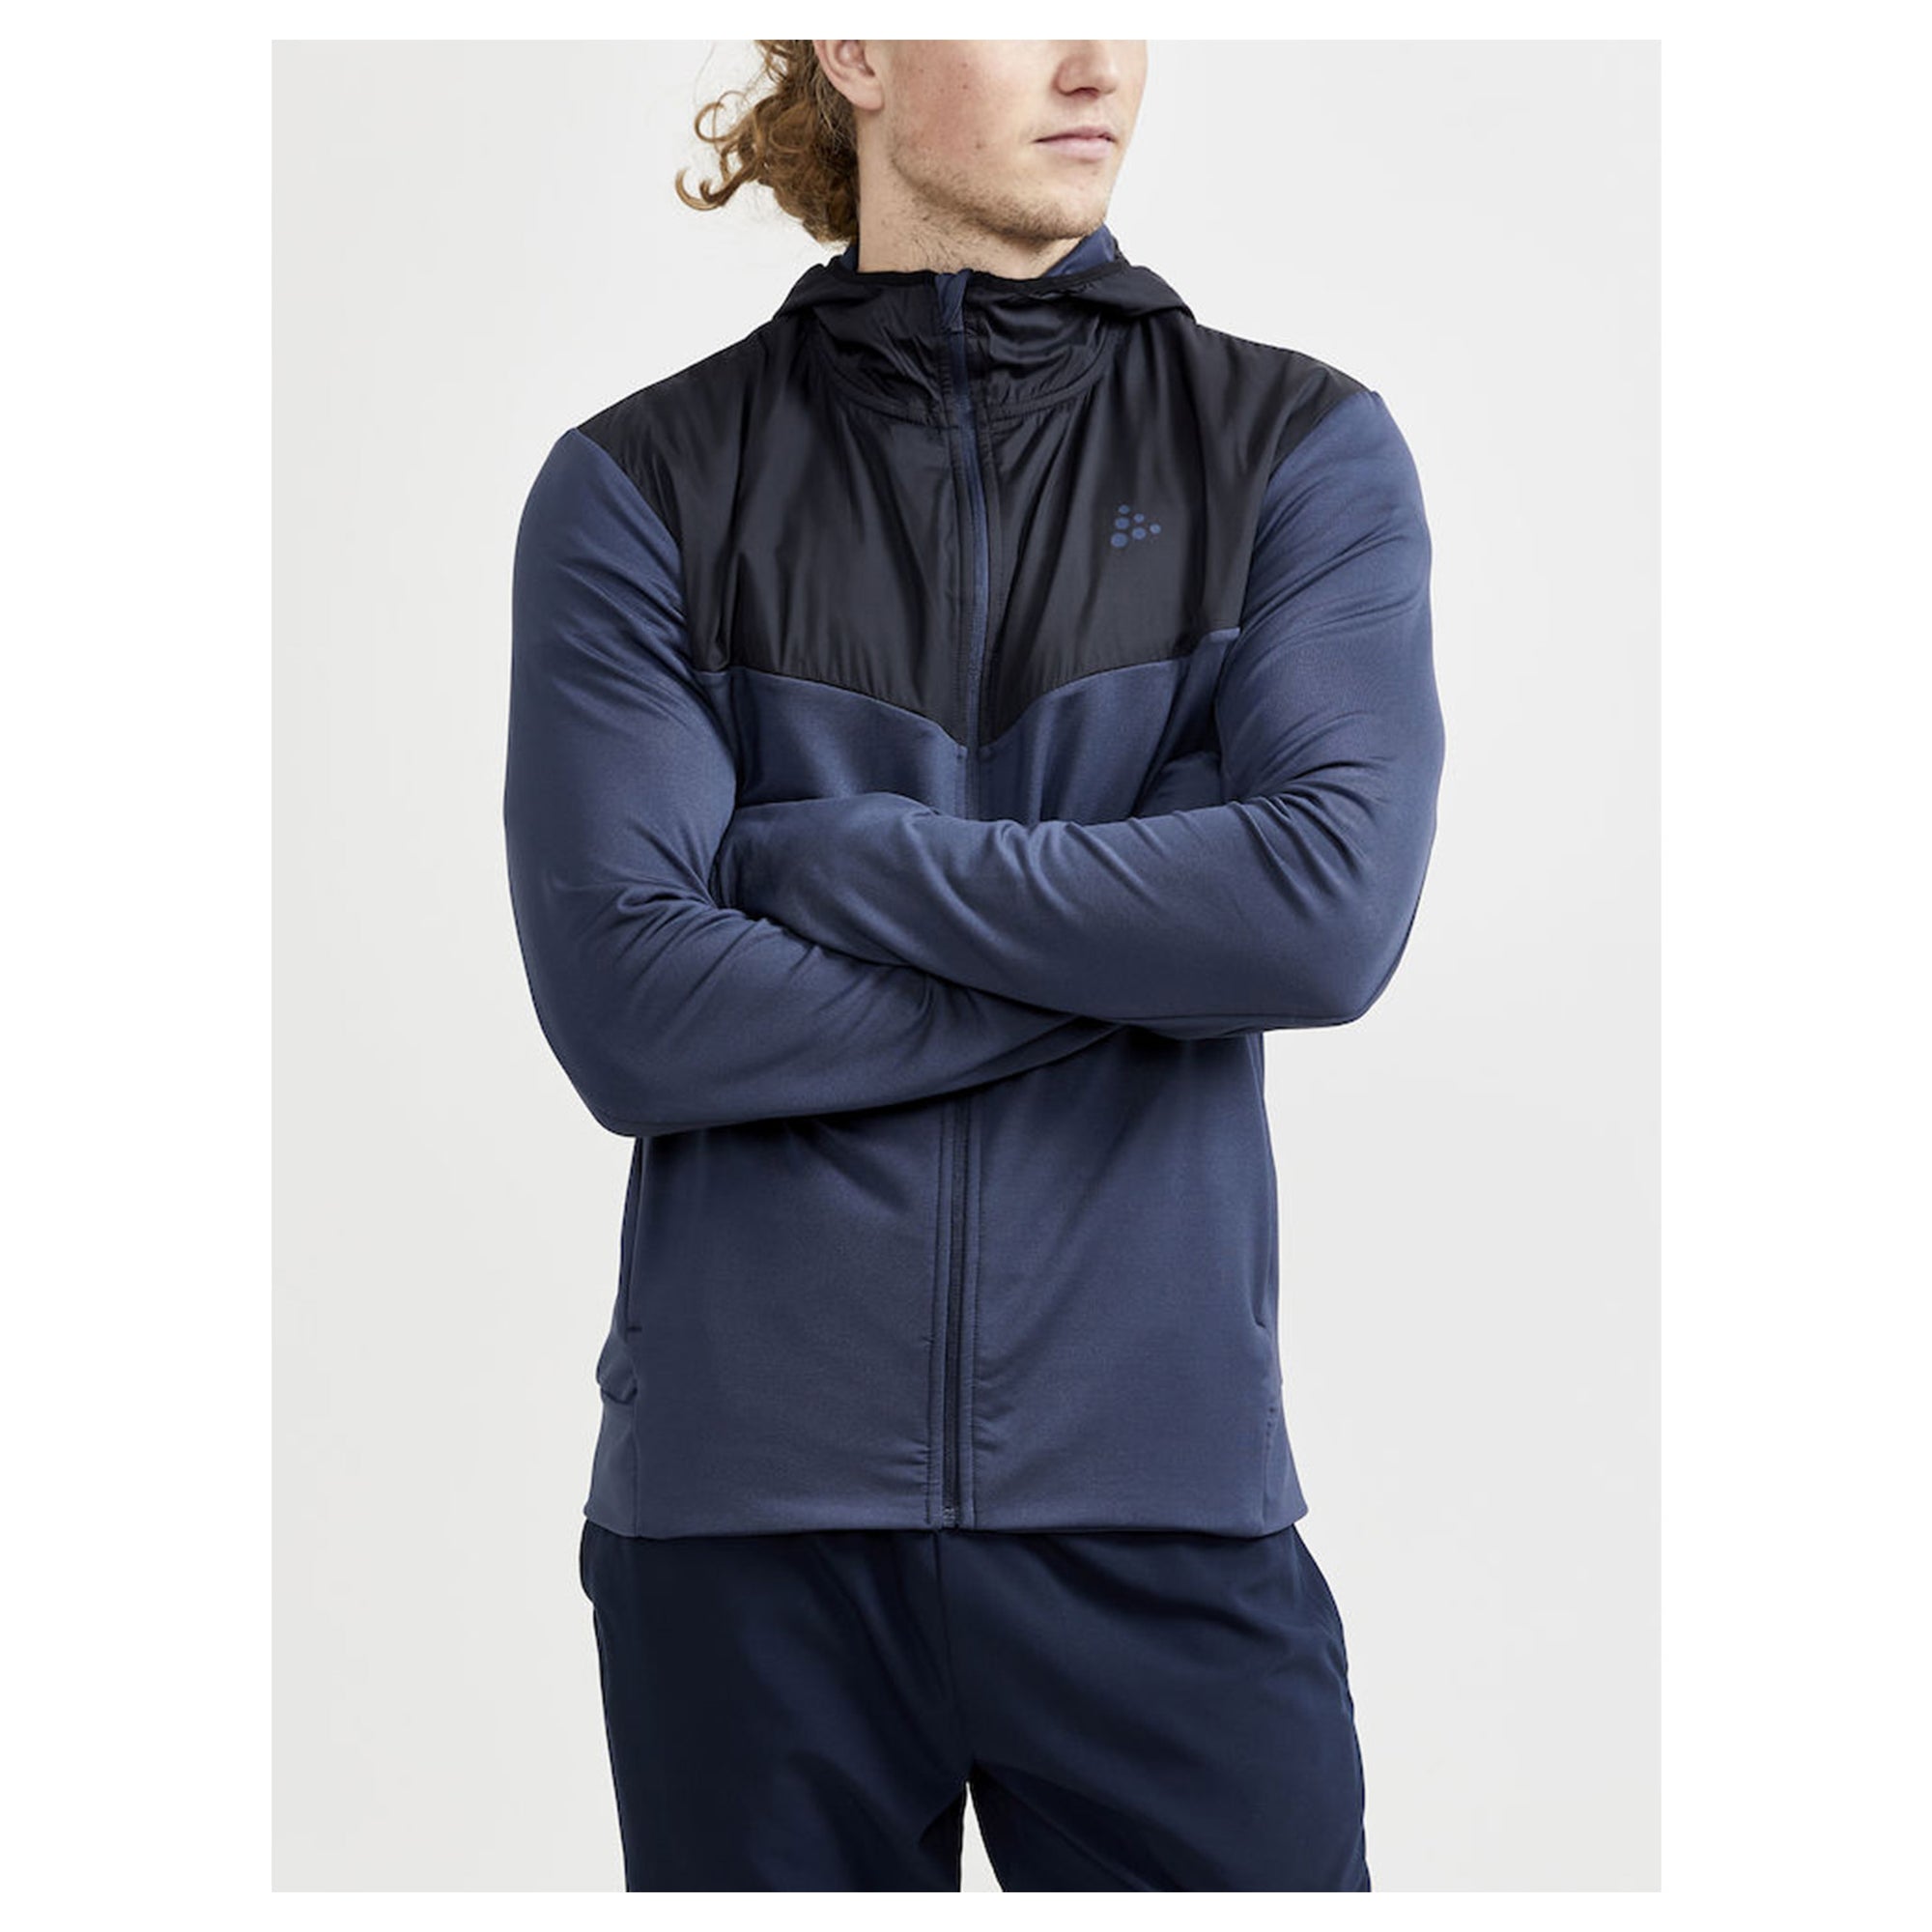 CRAFT ADV CHARGE JERSEY HOOD JACKET - HOMME